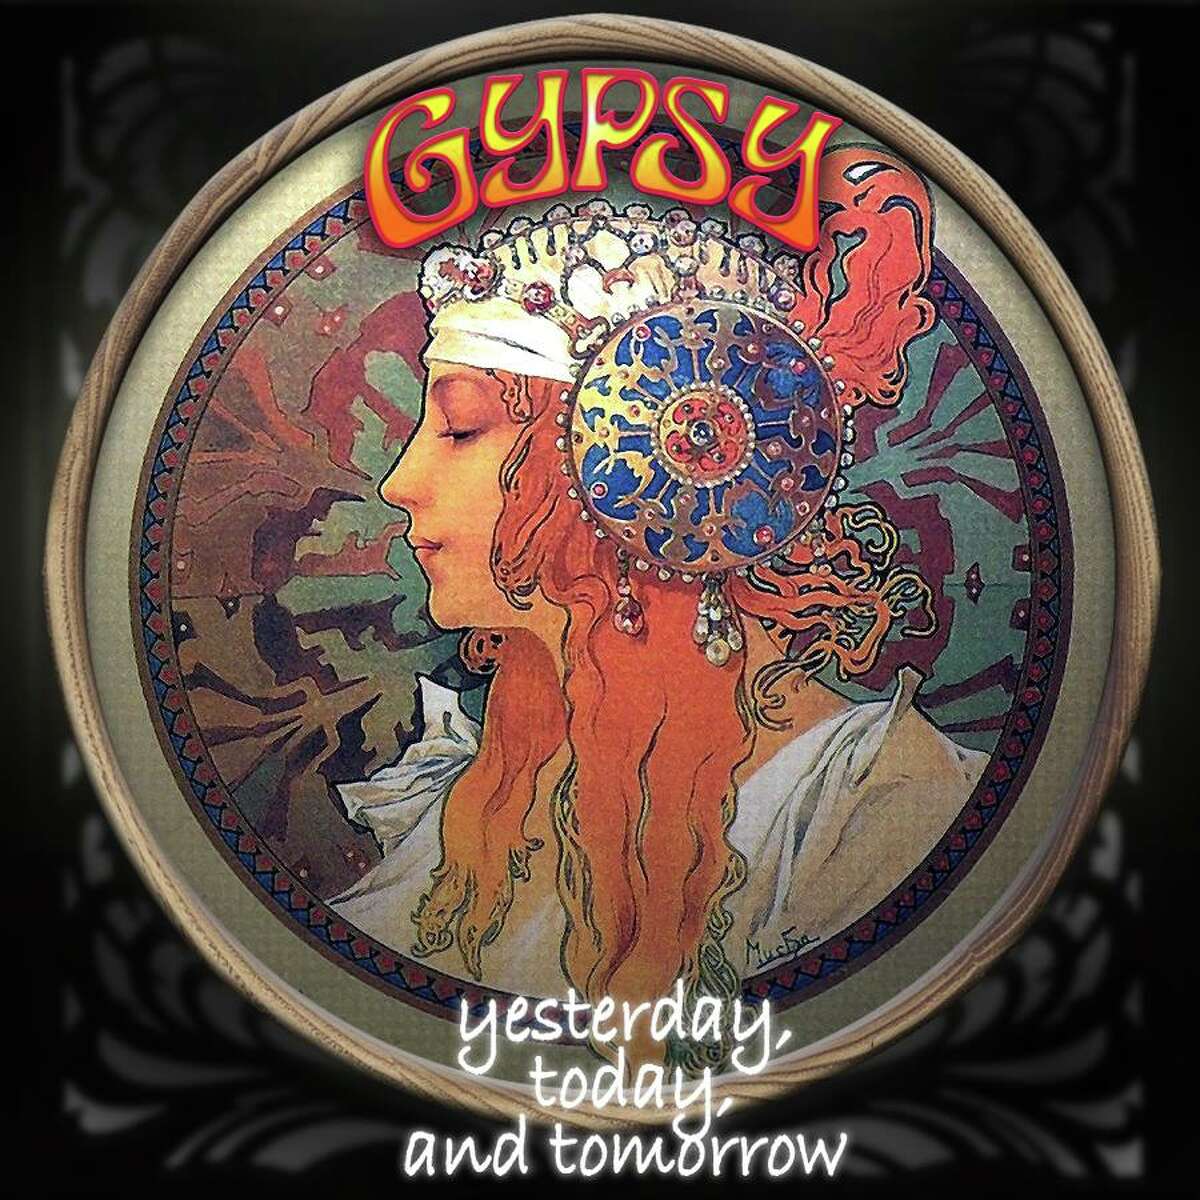 Gypsy will perform at The Wildey Theatre, 252 N. Main St., in Edwardsville at 8 p.m. Friday, July 8 and Saturday, July 9.